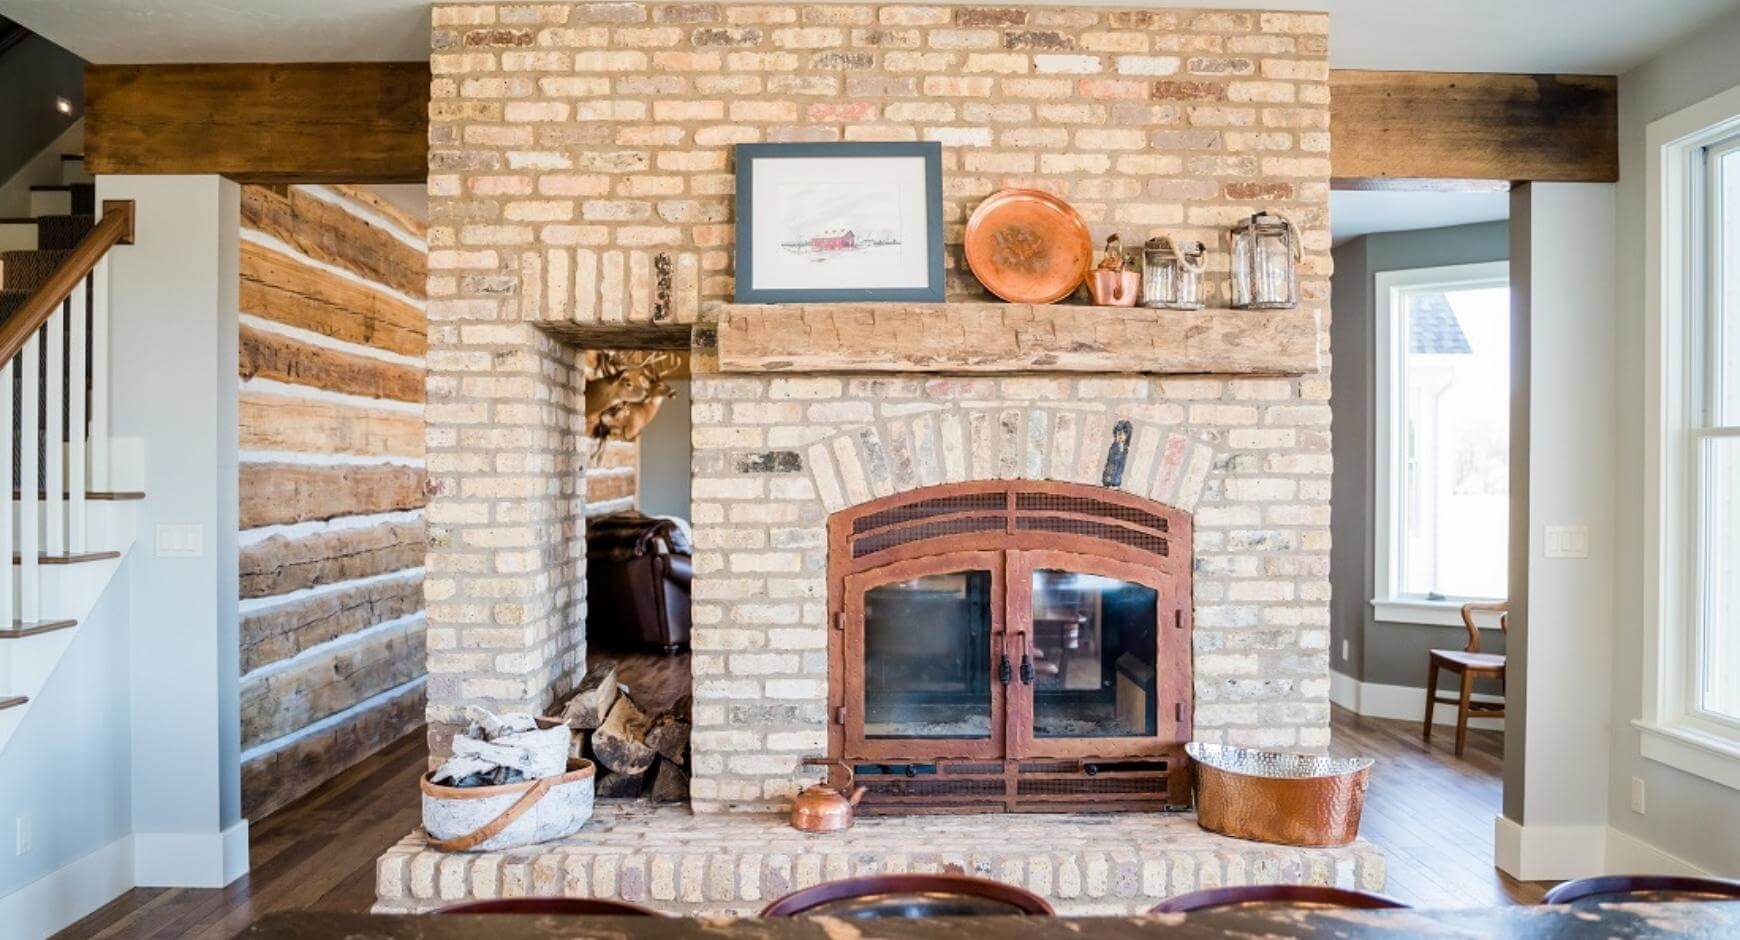 13 Best Firewood Storage Ideas for Your Wood Fireplace